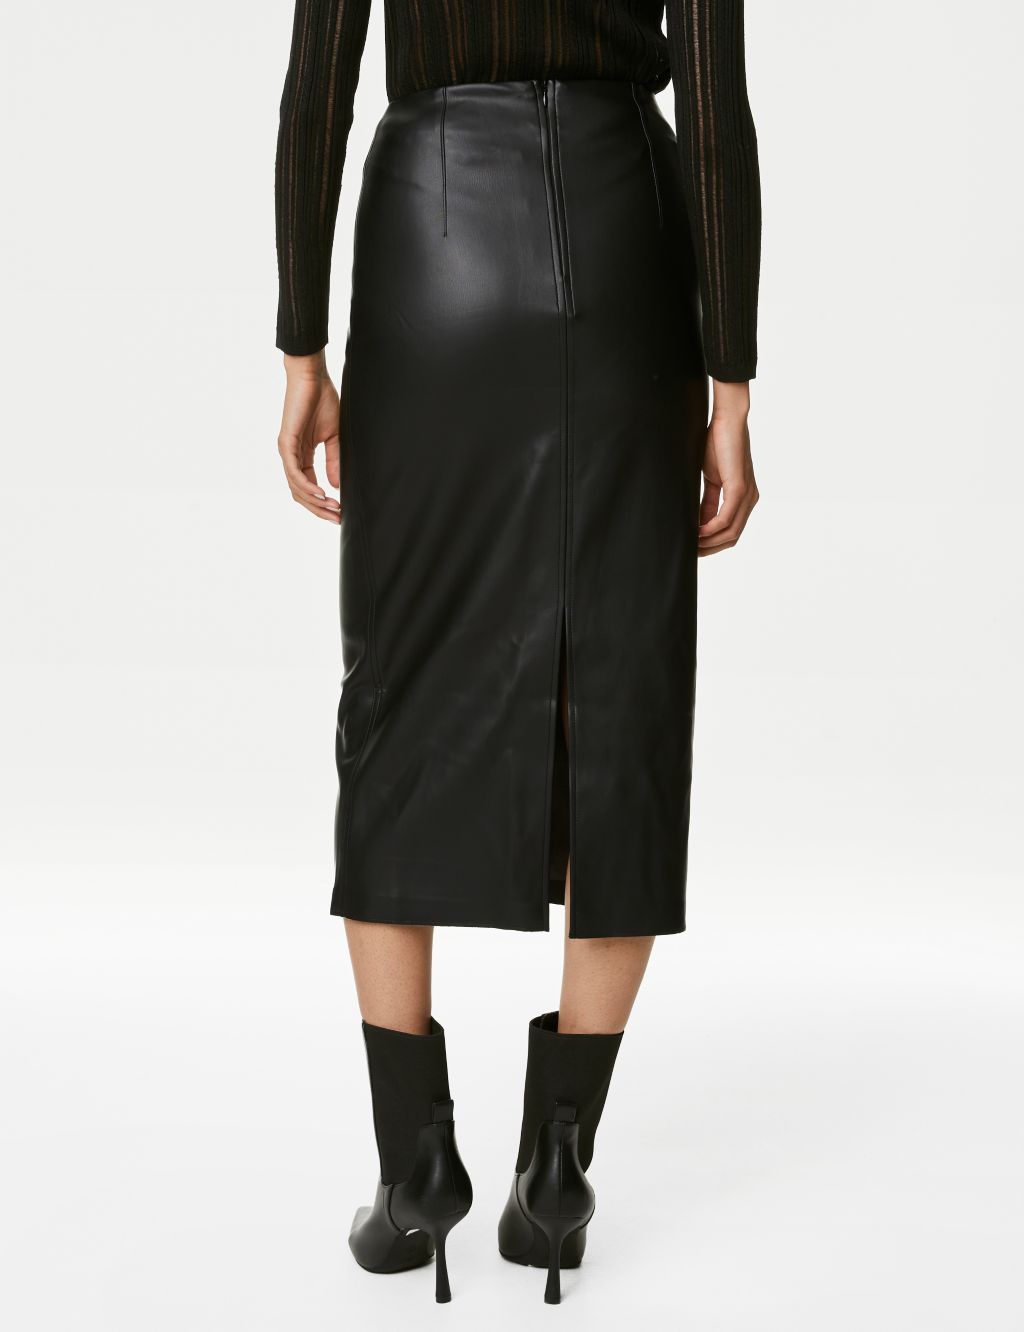 Leather Look Midaxi Pencil Skirt image 6